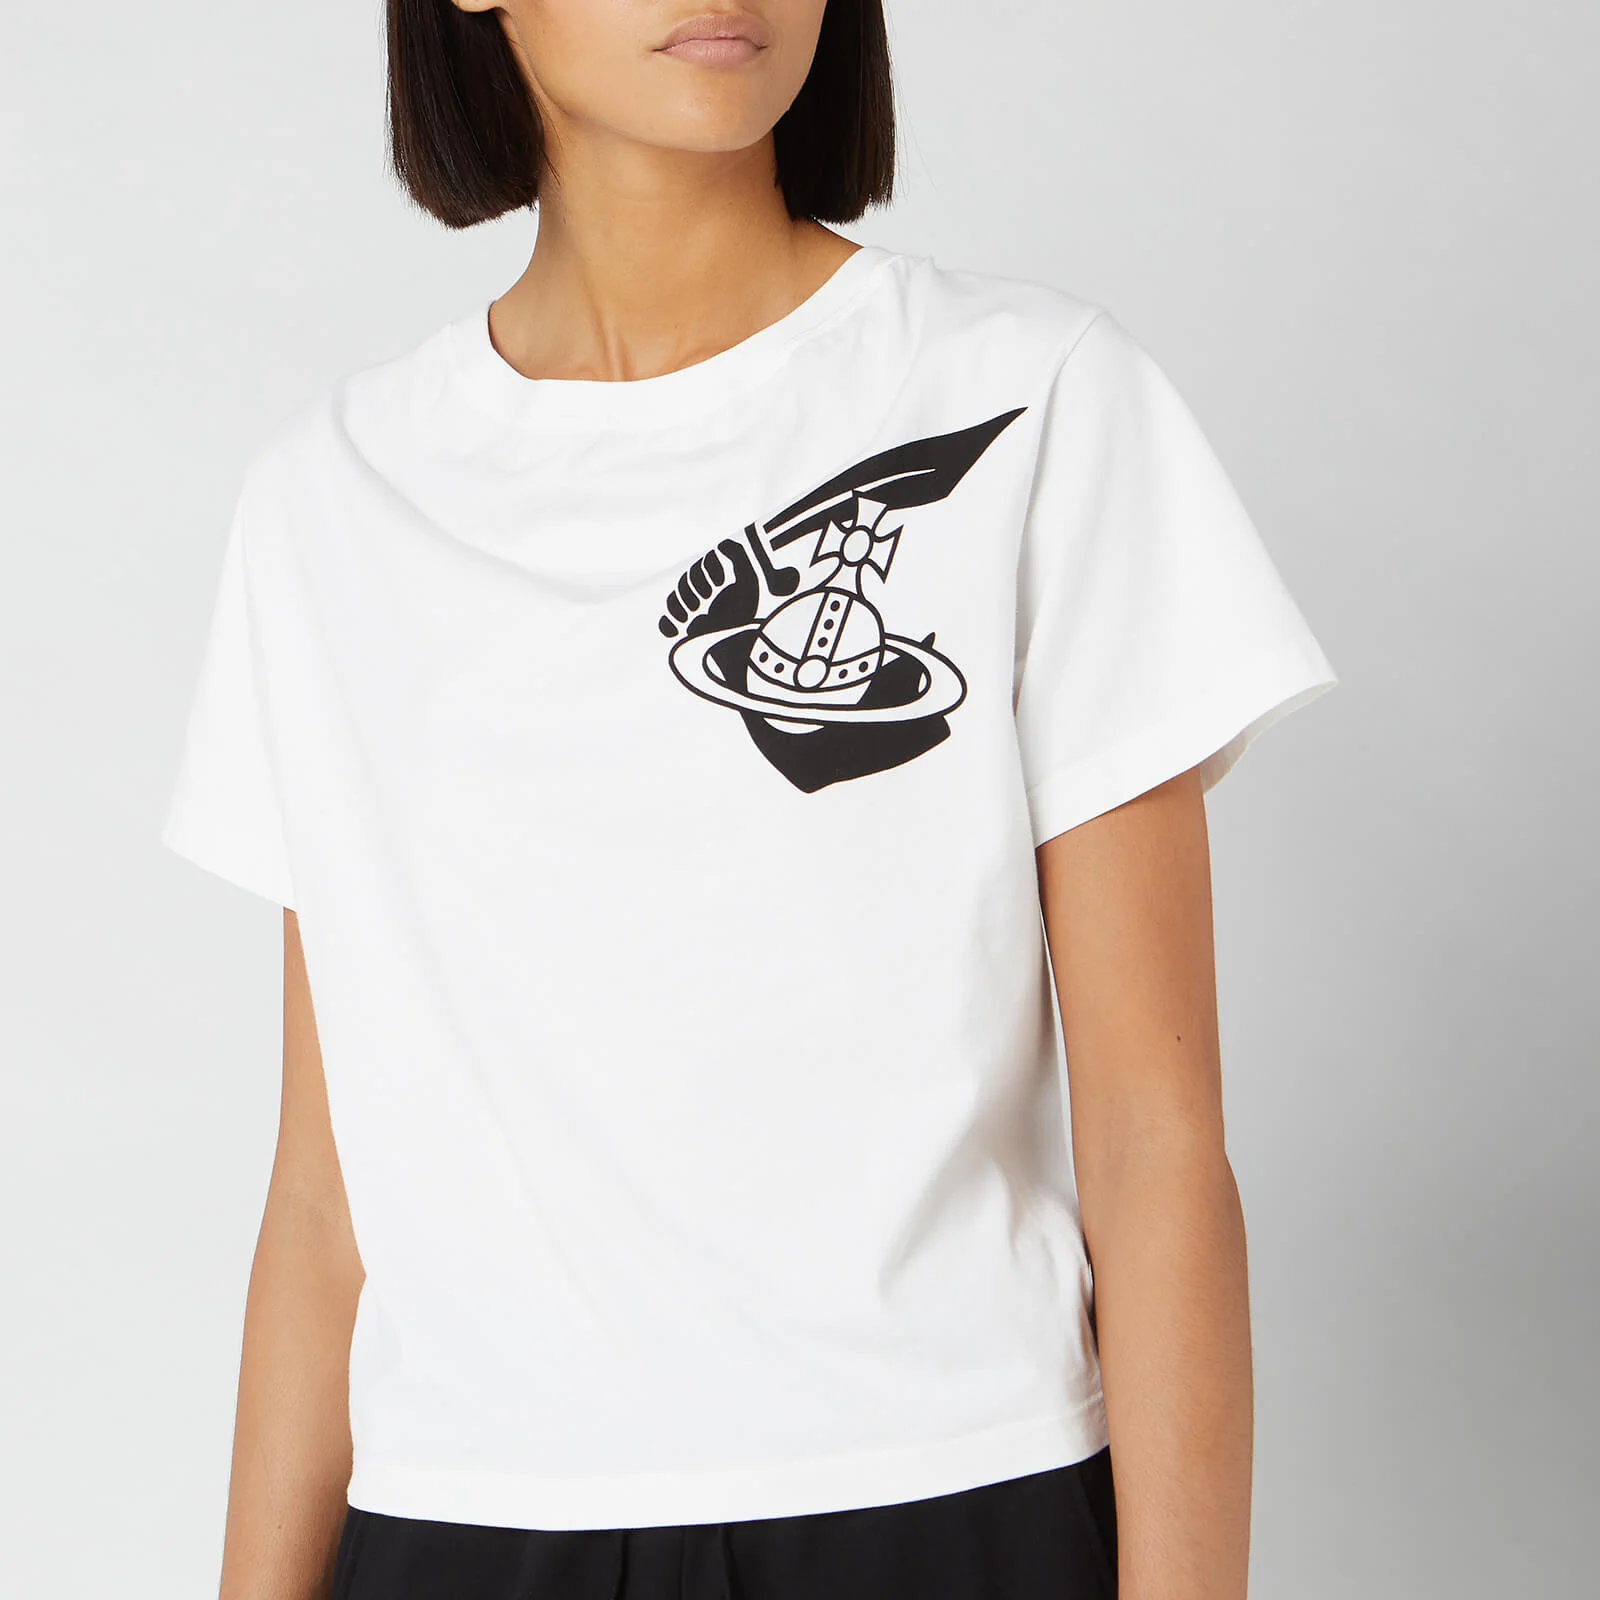 Vivienne Westwood Anglomania Women's Historic T-Shirt - White Image 1